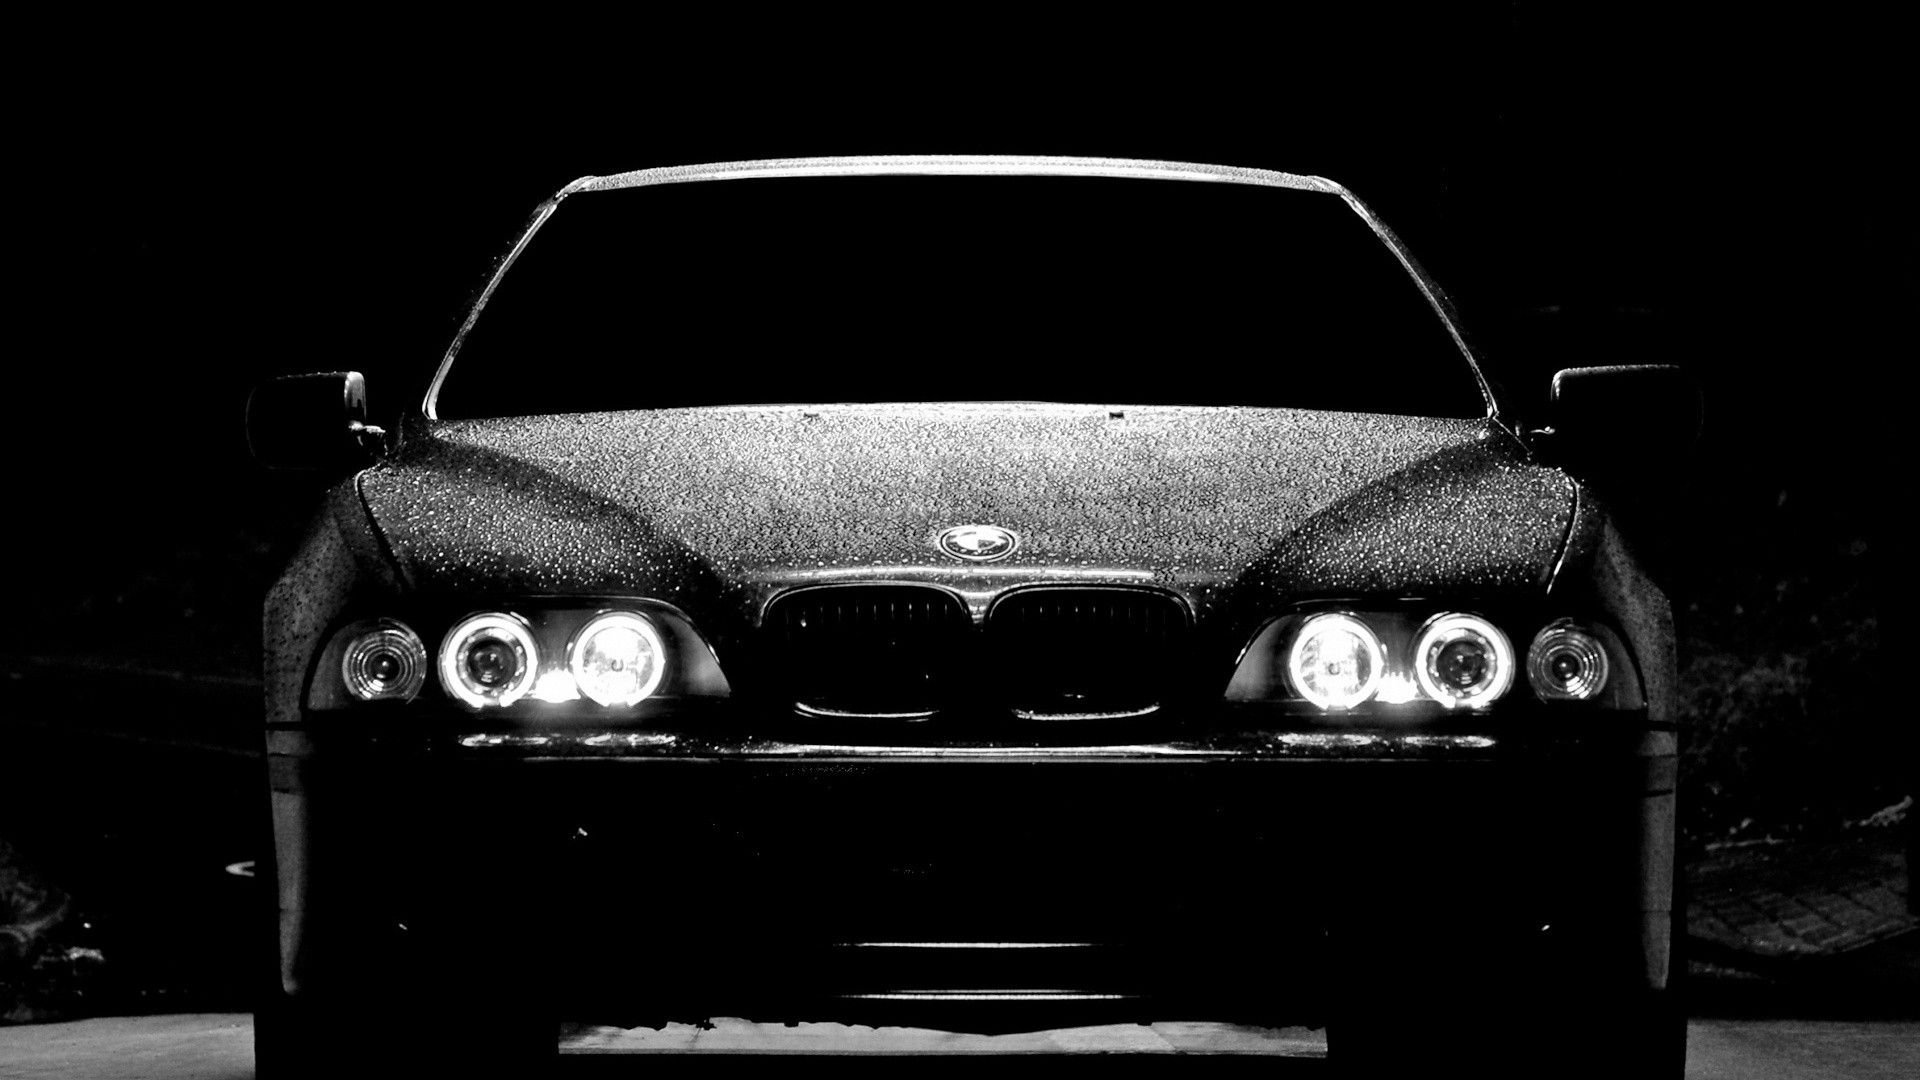 HD BMW Wallpaper Background For Free Download